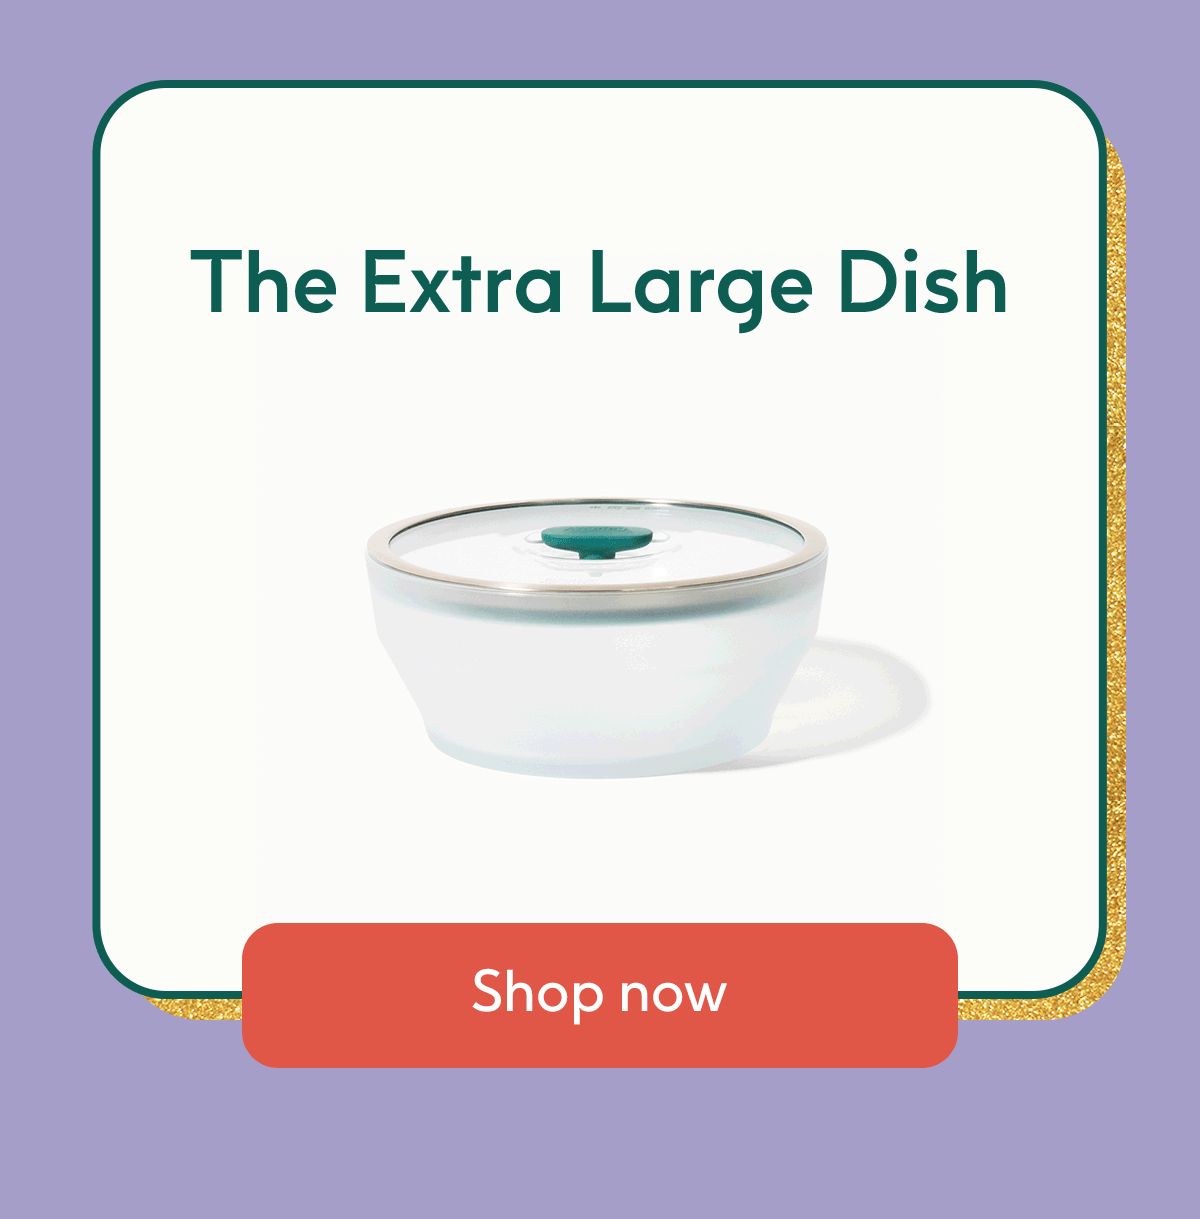 The Extra Large Dish